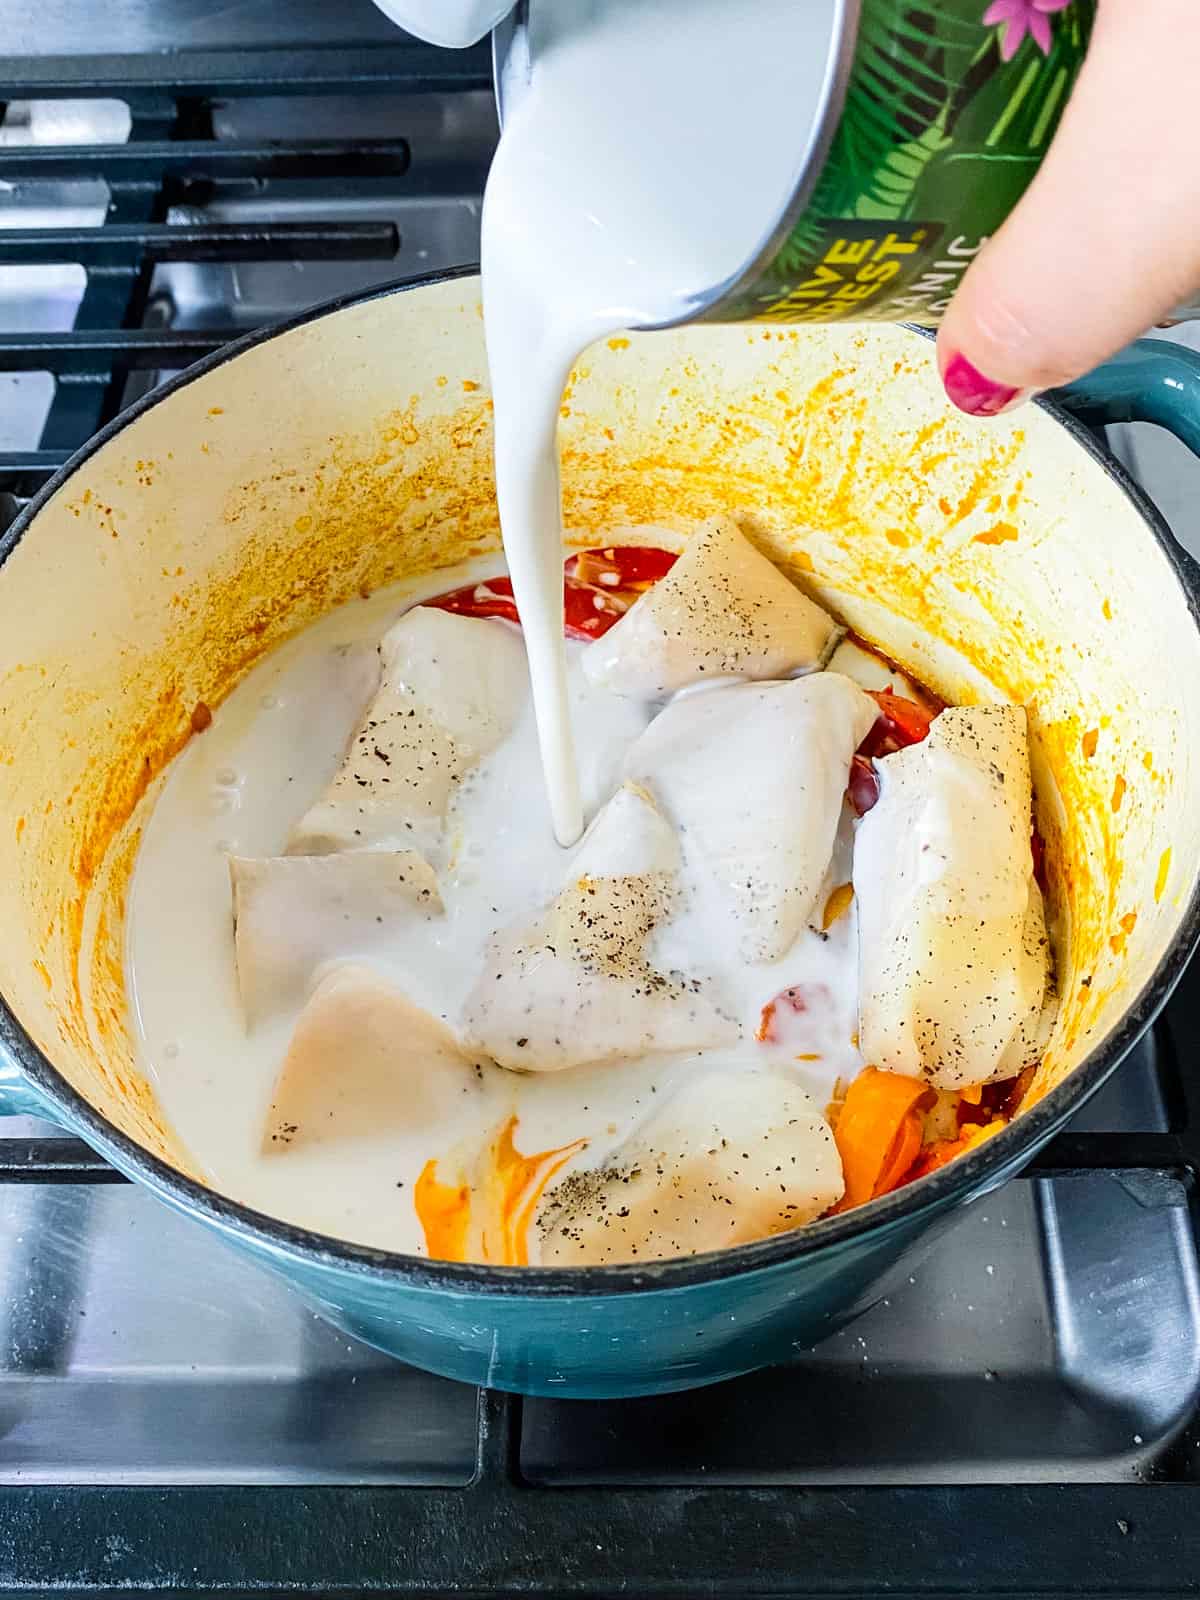 Pour a can of coconut milk into the Brazilian fish stew.